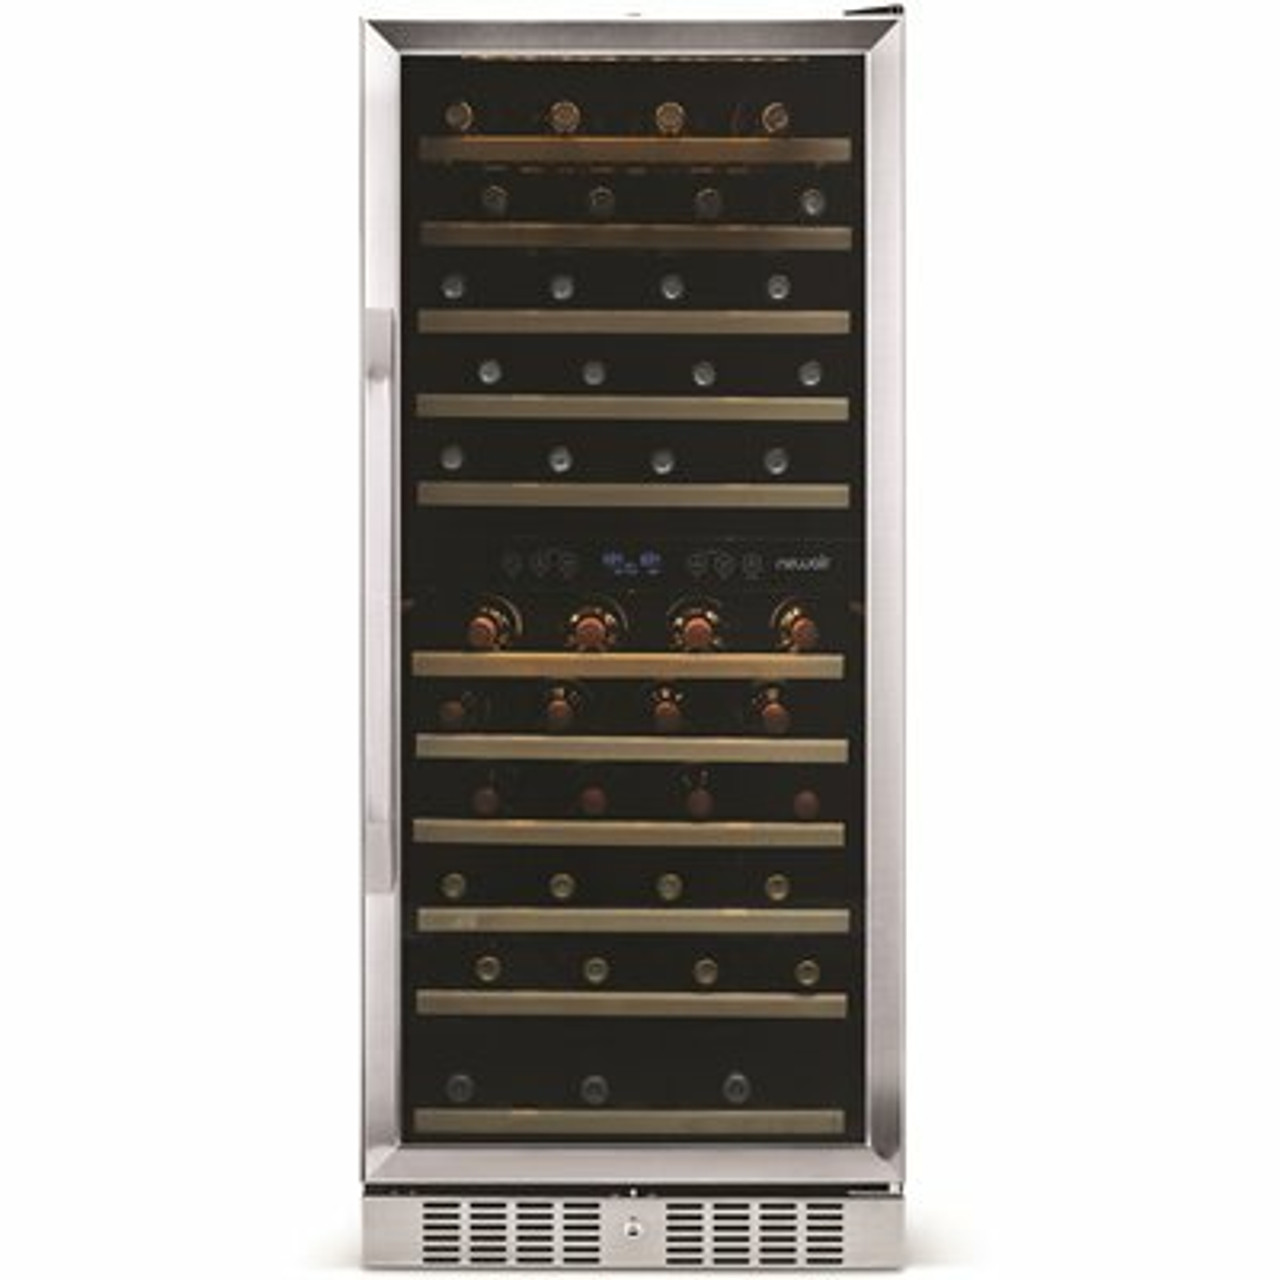 Newair Dual Zone 116-Bottle Built-In Wine Cooler Fridge With Smooth Rolling Shelves And Quiet Operation - Stainless Steel